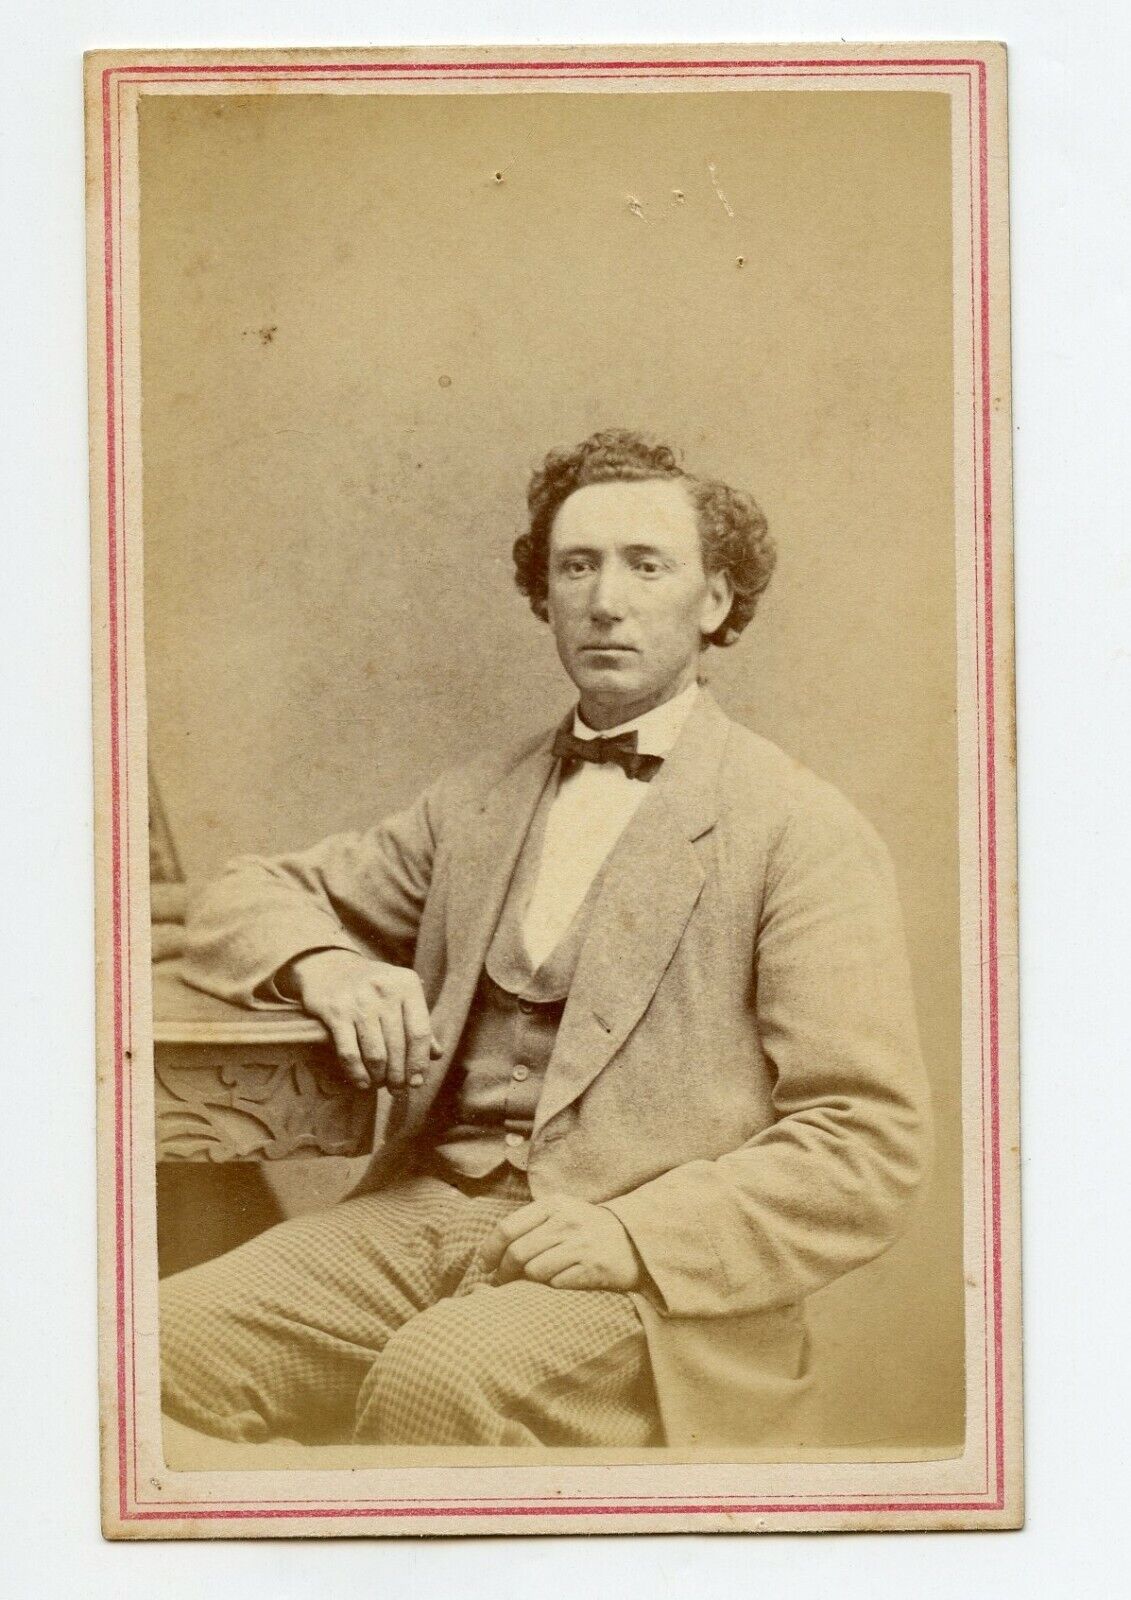 Prime minister MacDonald ? His double? CDV Photo by Wallace, Belleville Canada